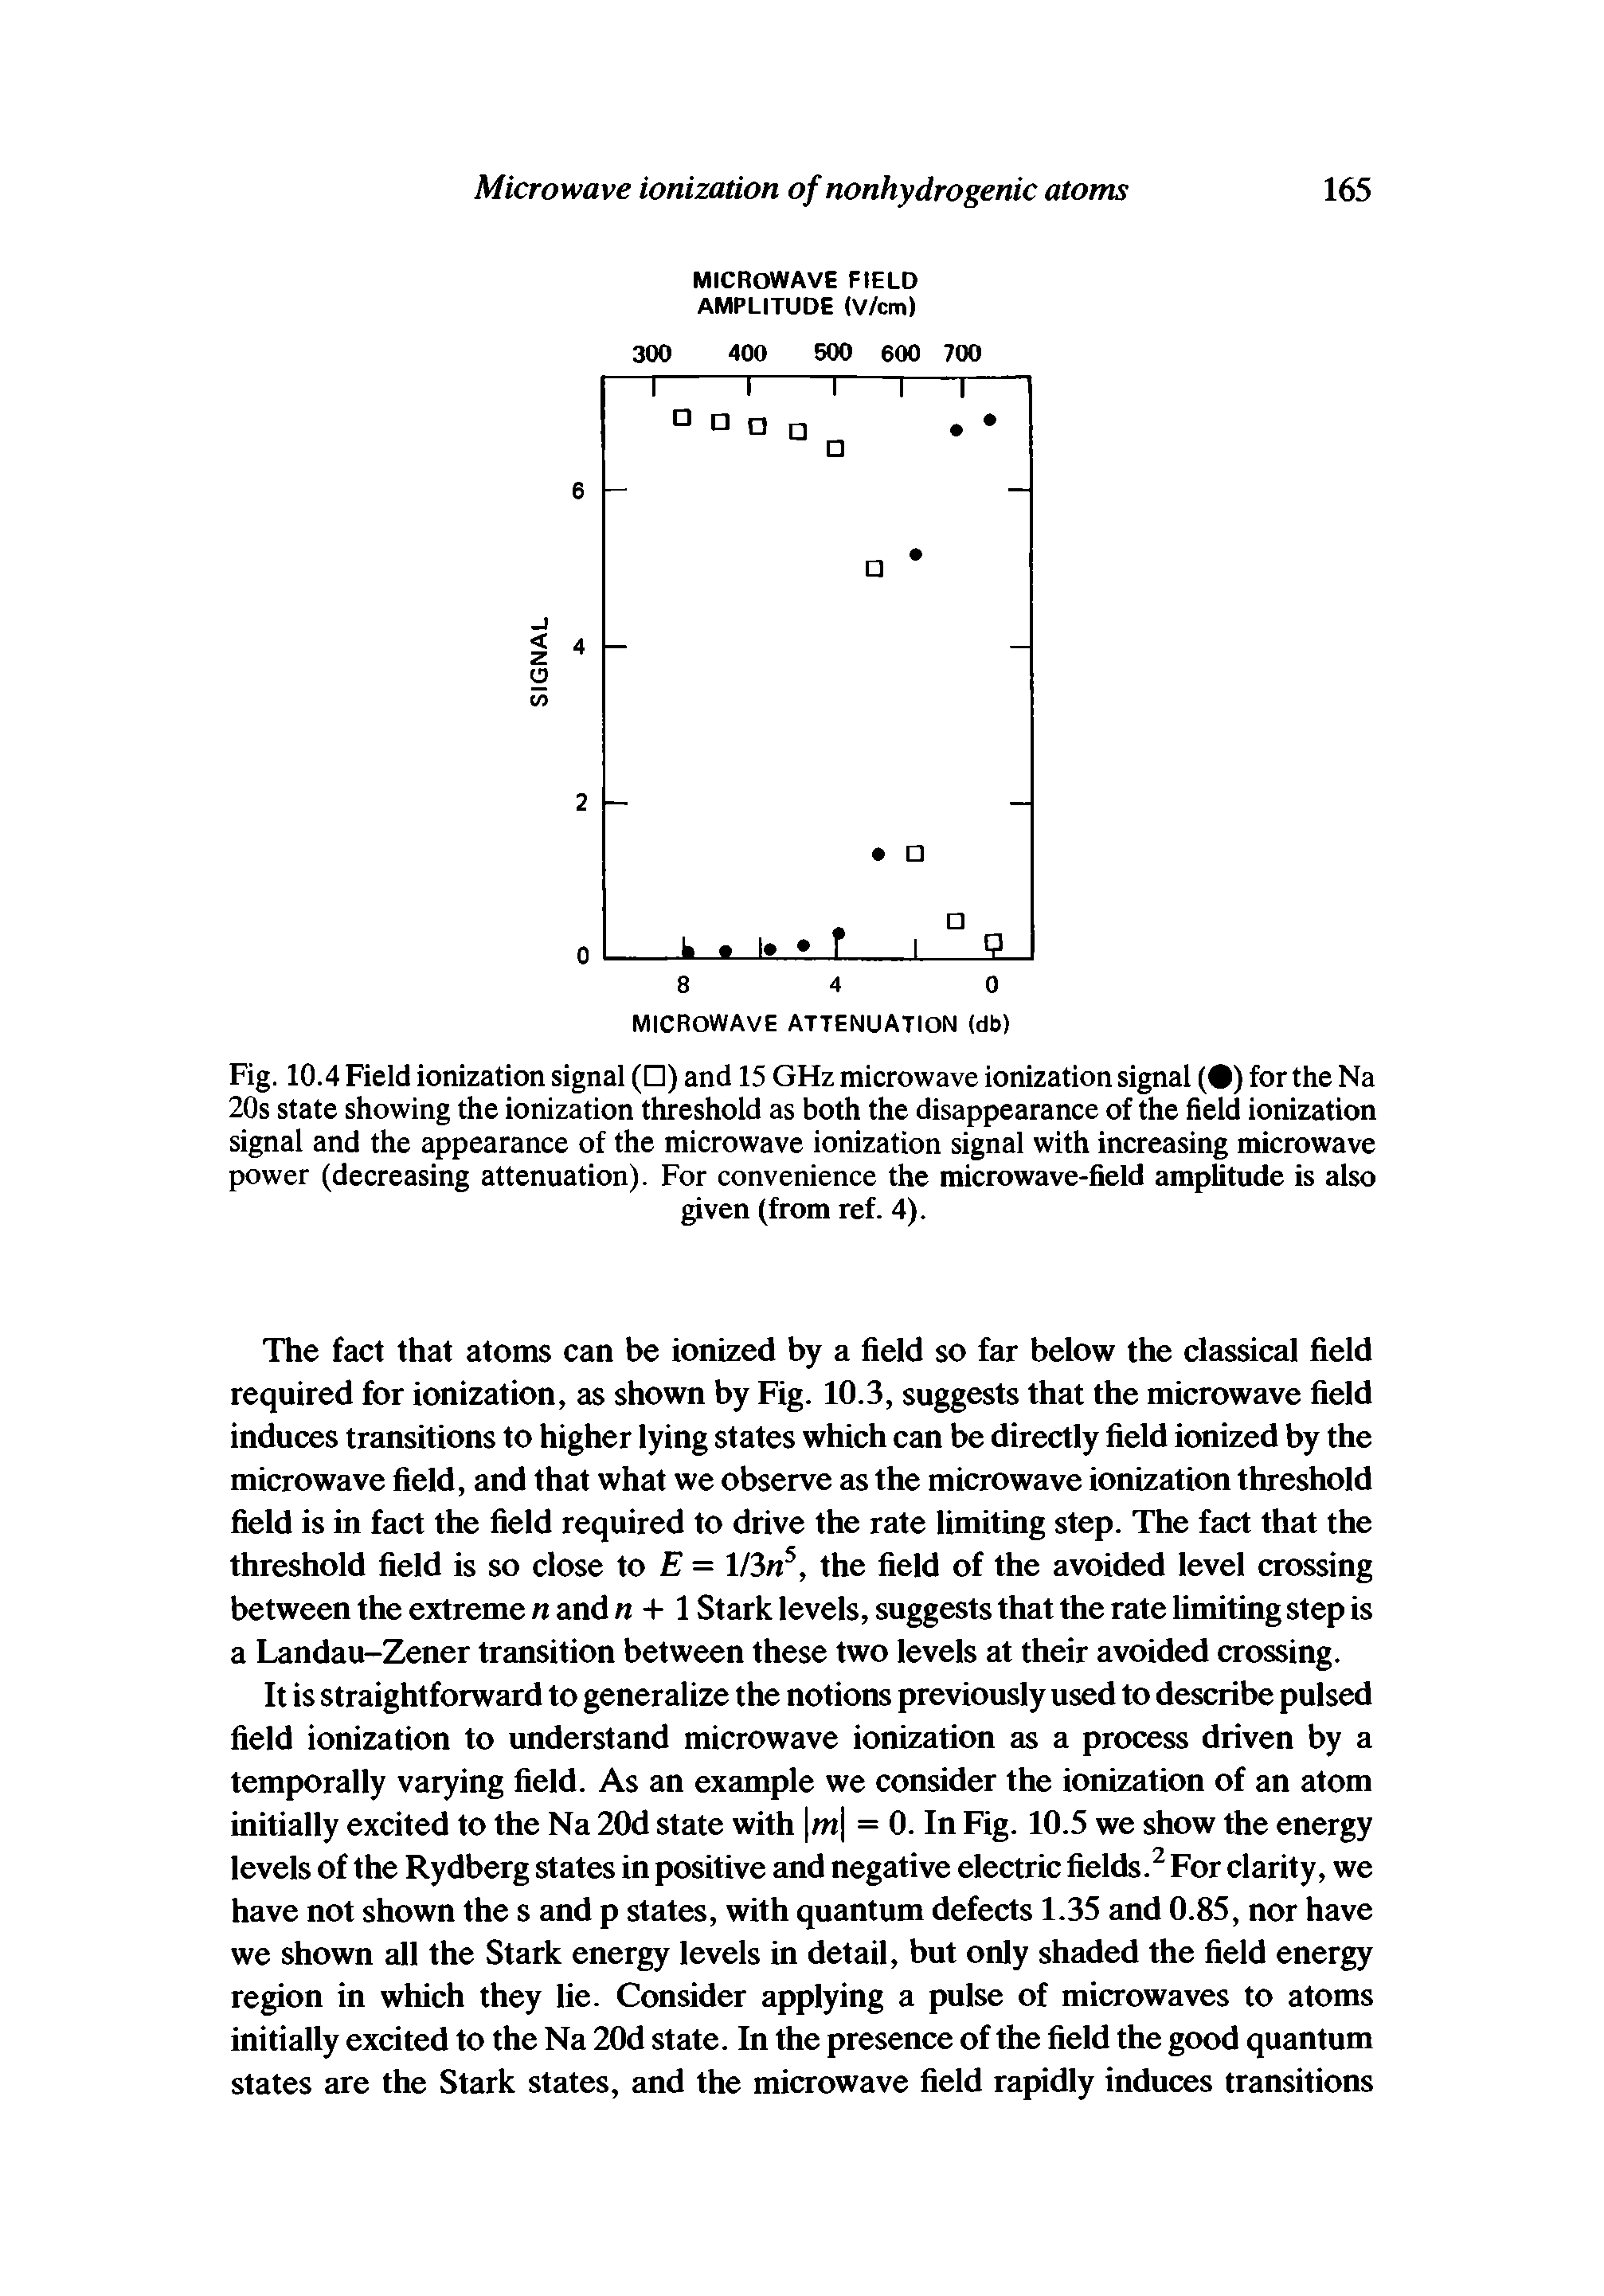 Fig. 10.4 Field ionization signal ( ) and 15 GHz microwave ionization signal ( ) for the Na 20s state showing the ionization threshold as both the disappearance of the field ionization signal and the appearance of the microwave ionization signal with increasing microwave power (decreasing attenuation). For convenience the microwave-field amplitude is also...